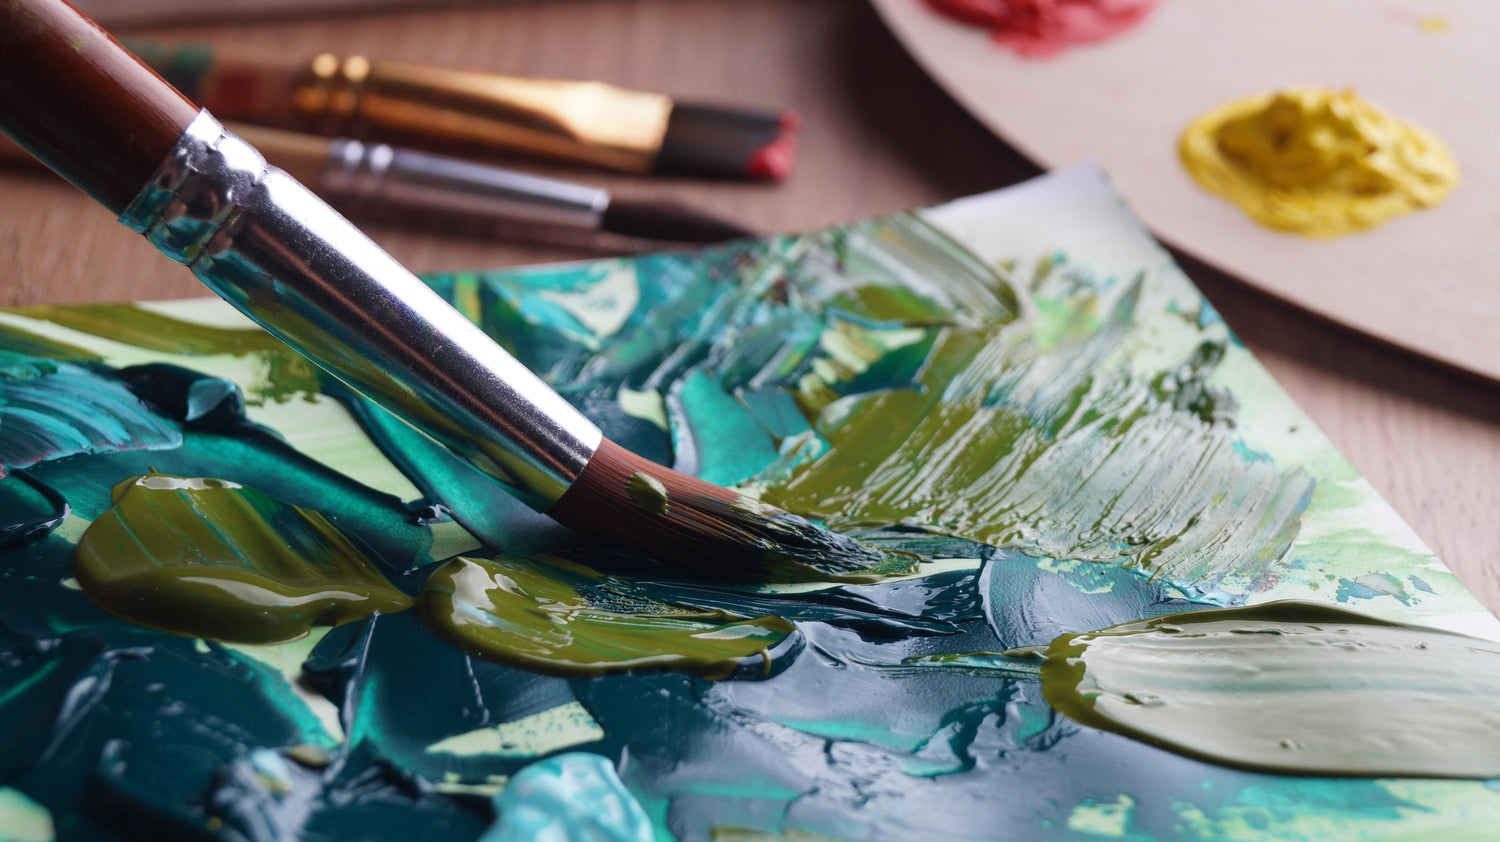 Mastering Gouache Paint for Printmaking: Tips and Tricks - Gel Press